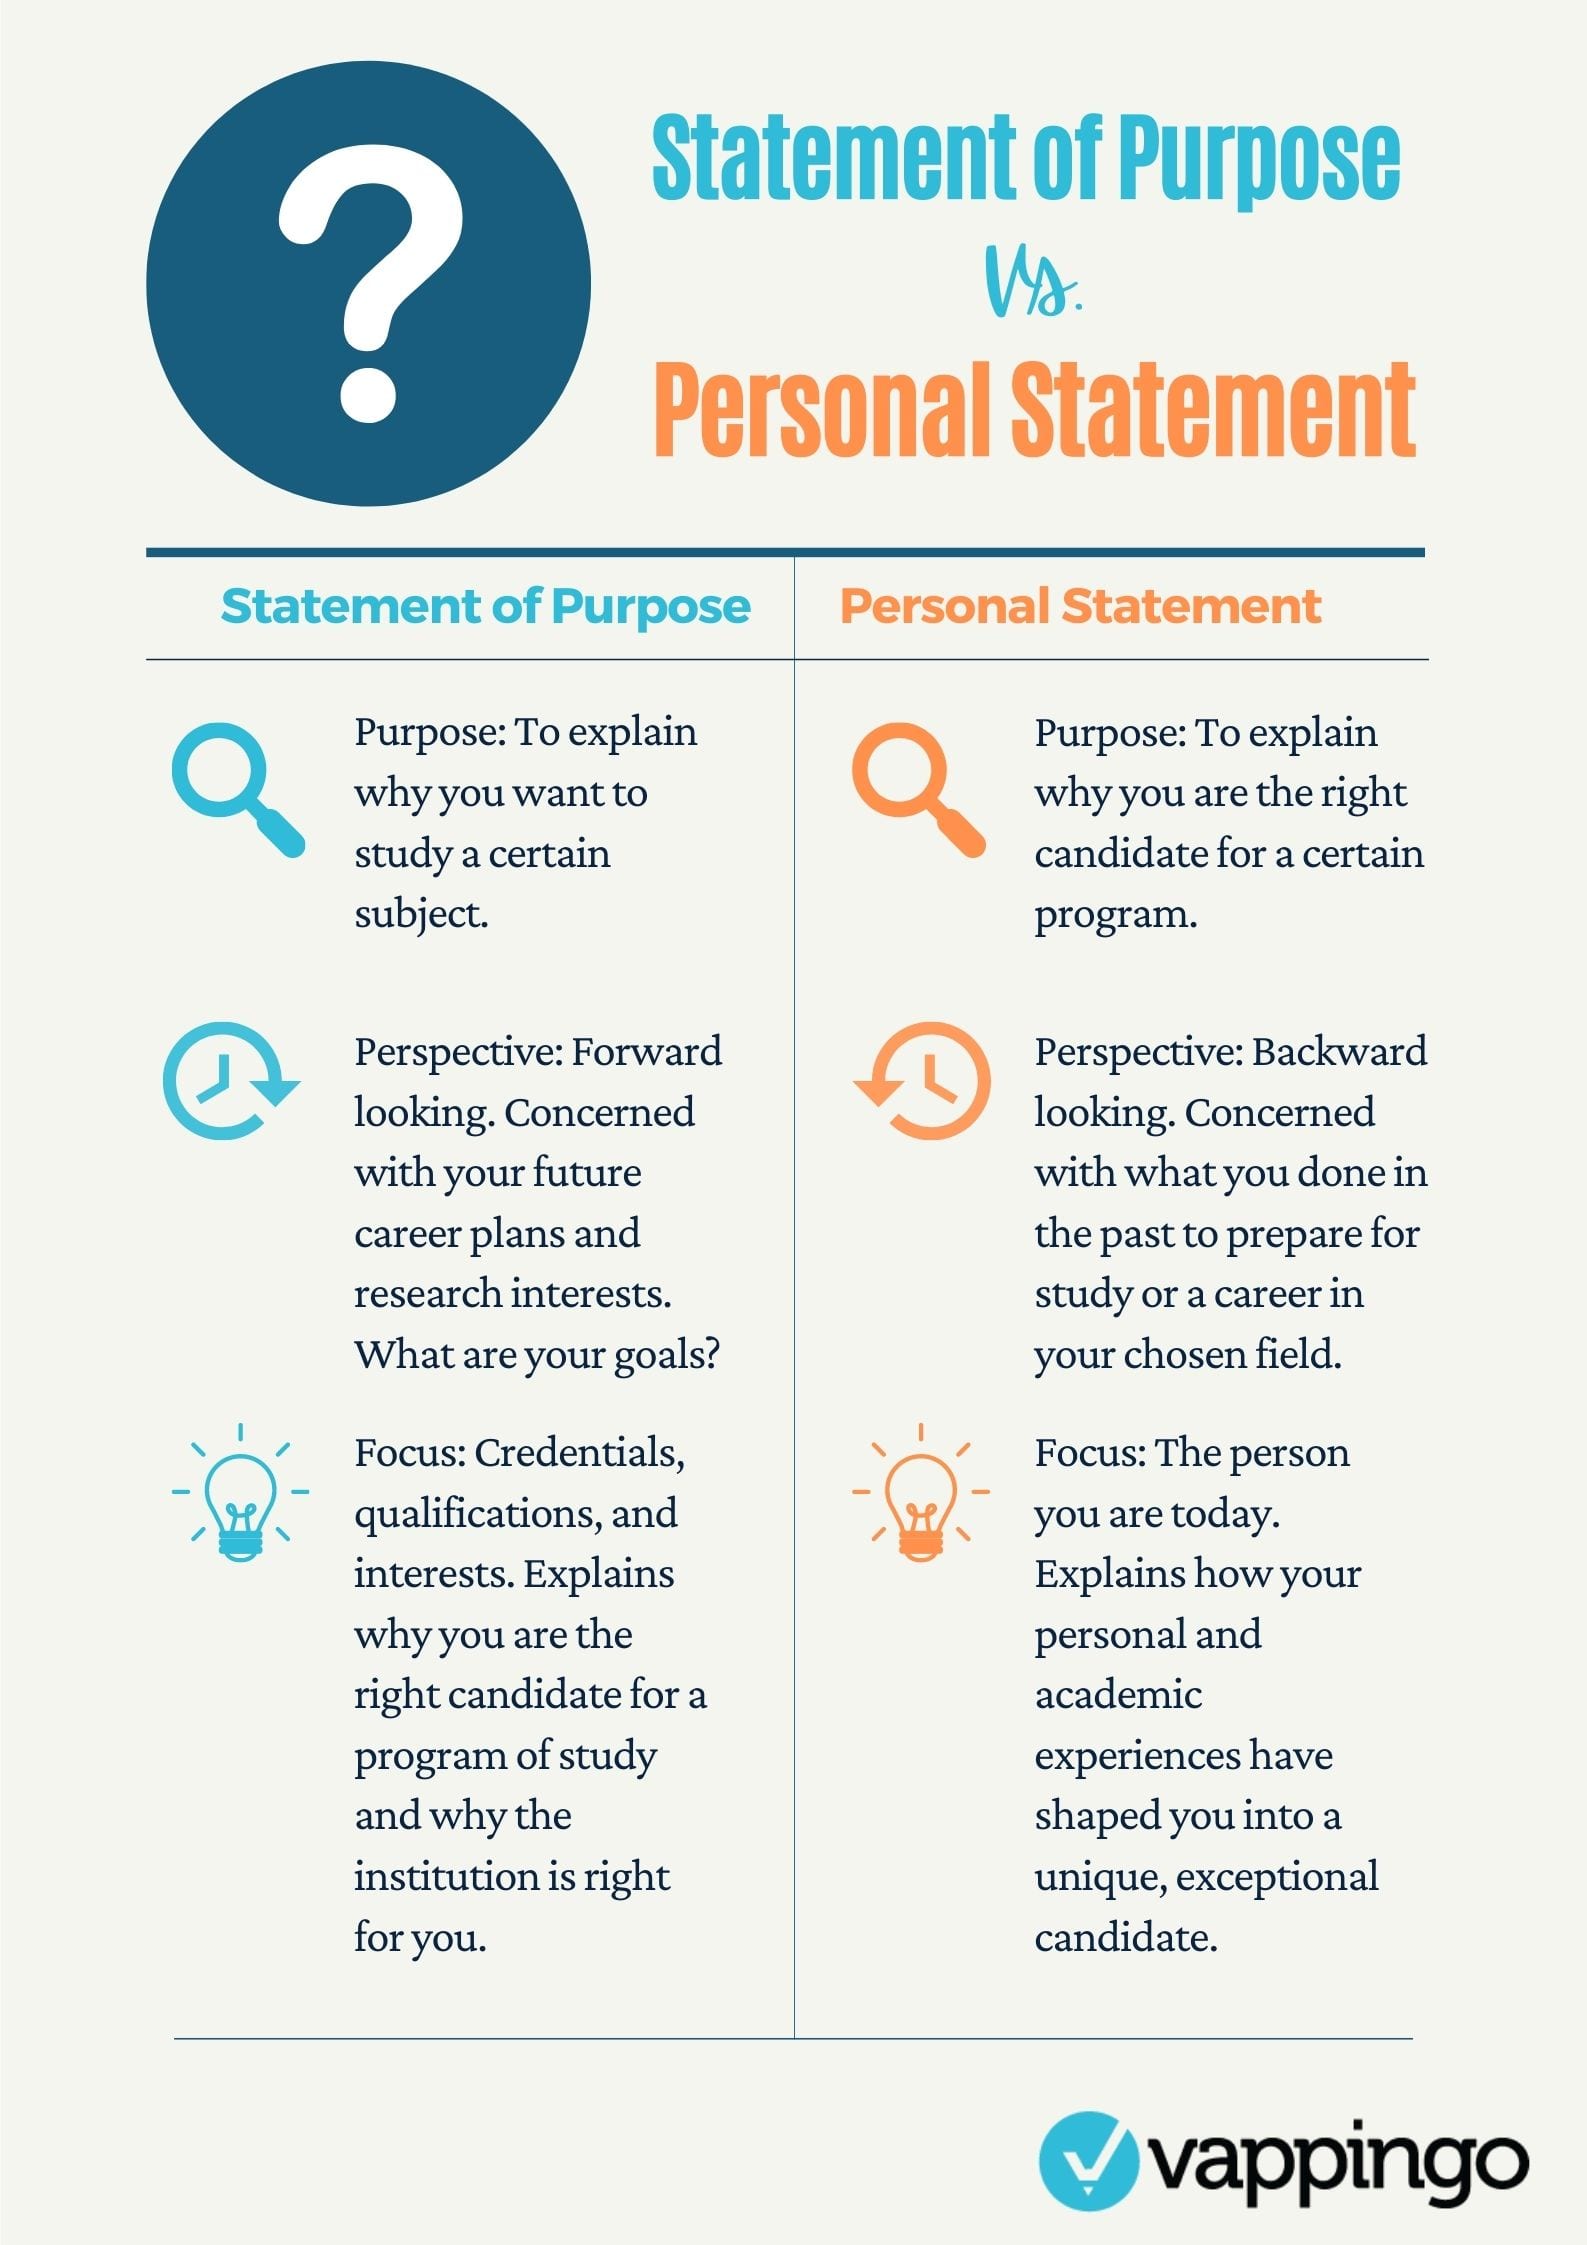 personal statement definition dictionary